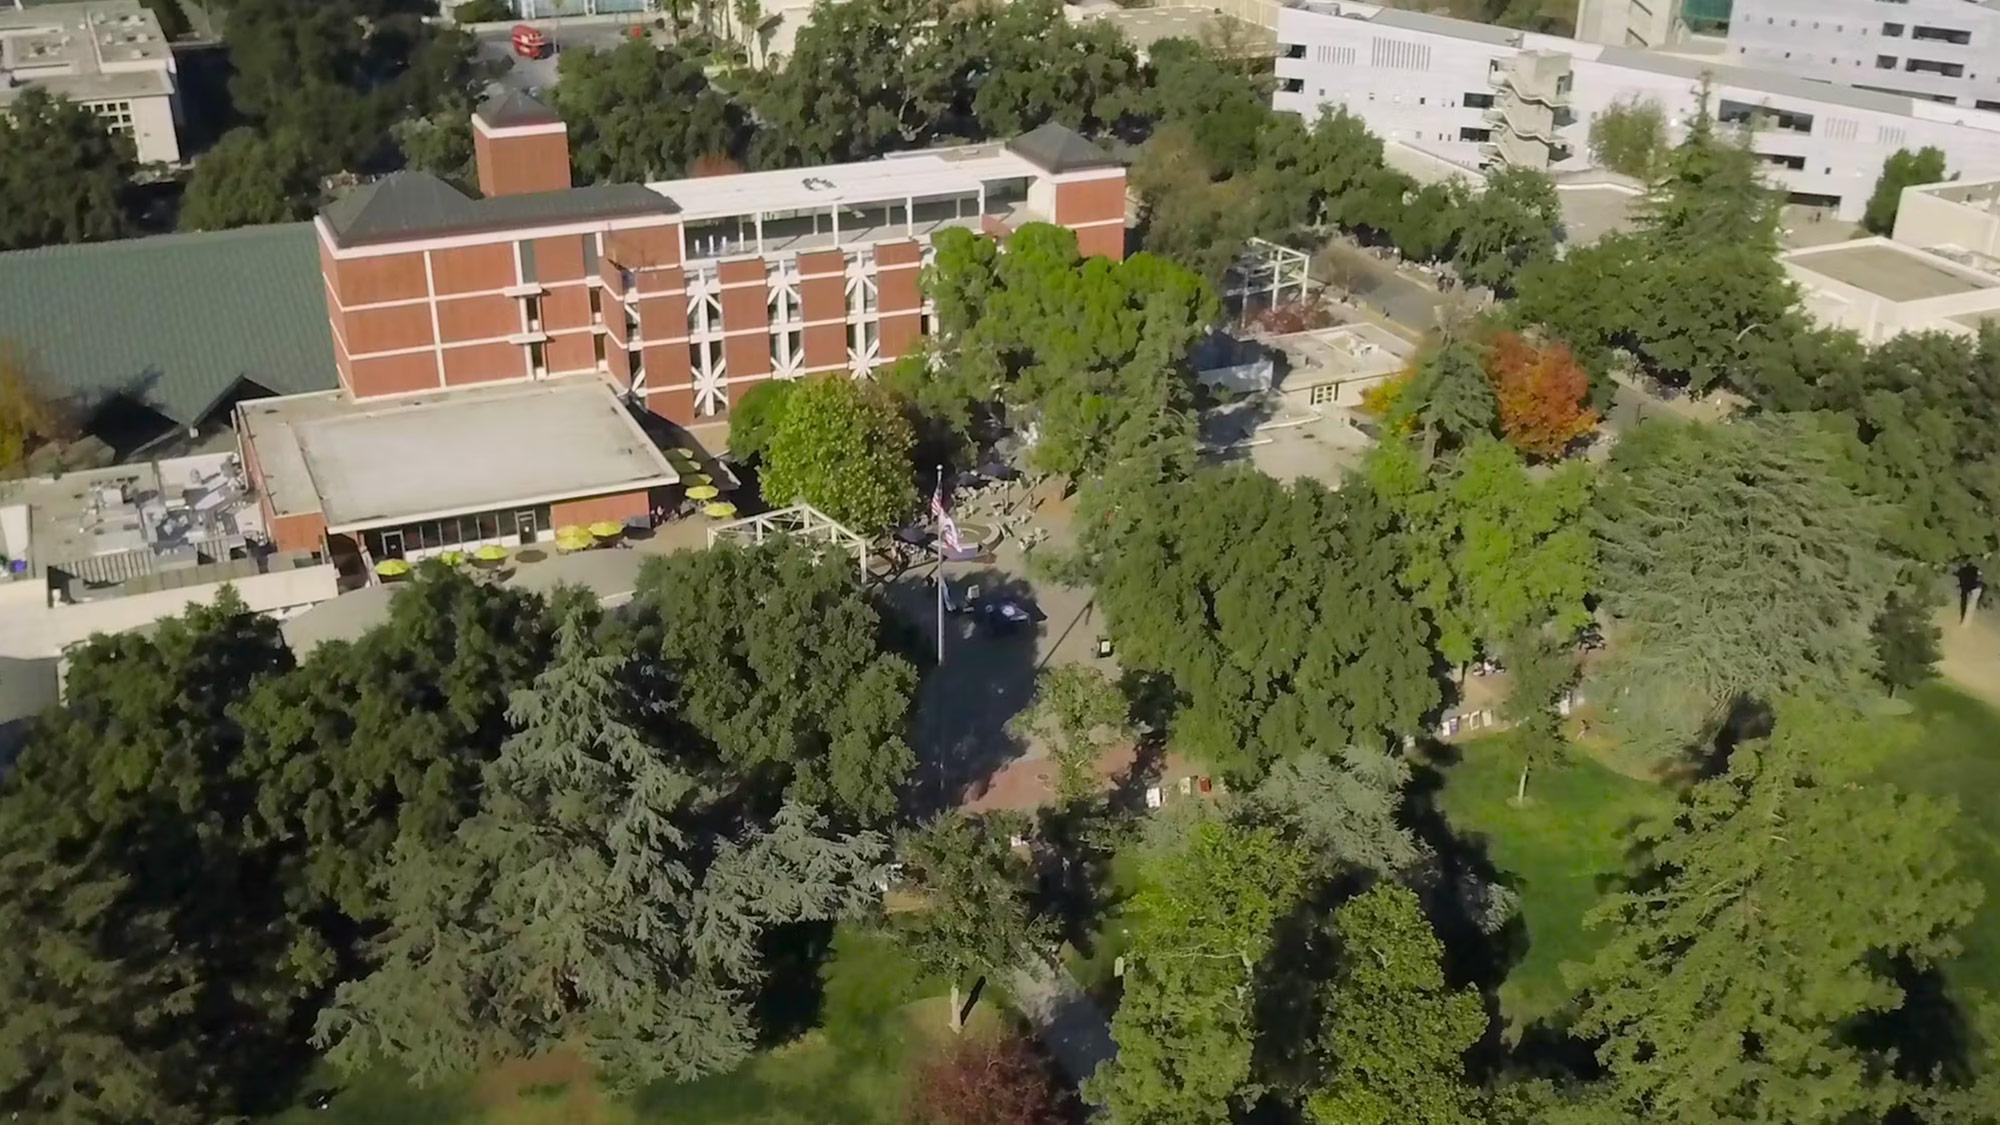 An aerial view of campus with trees and buildings